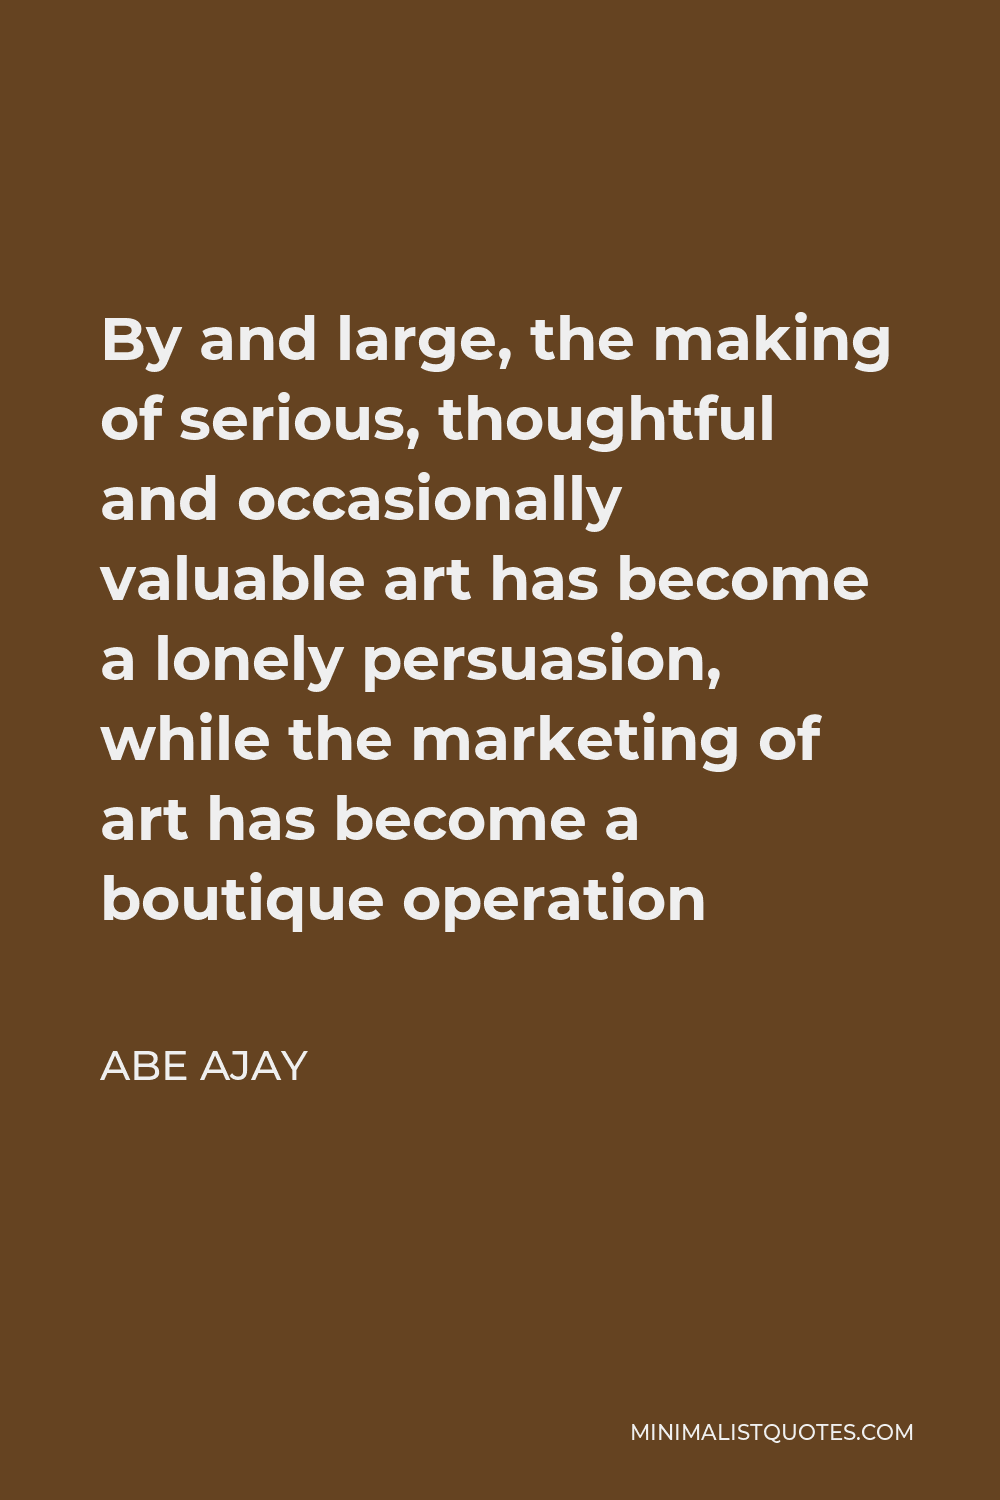 Abe Ajay Quote - By and large, the making of serious, thoughtful and occasionally valuable art has become a lonely persuasion, while the marketing of art has become a boutique operation